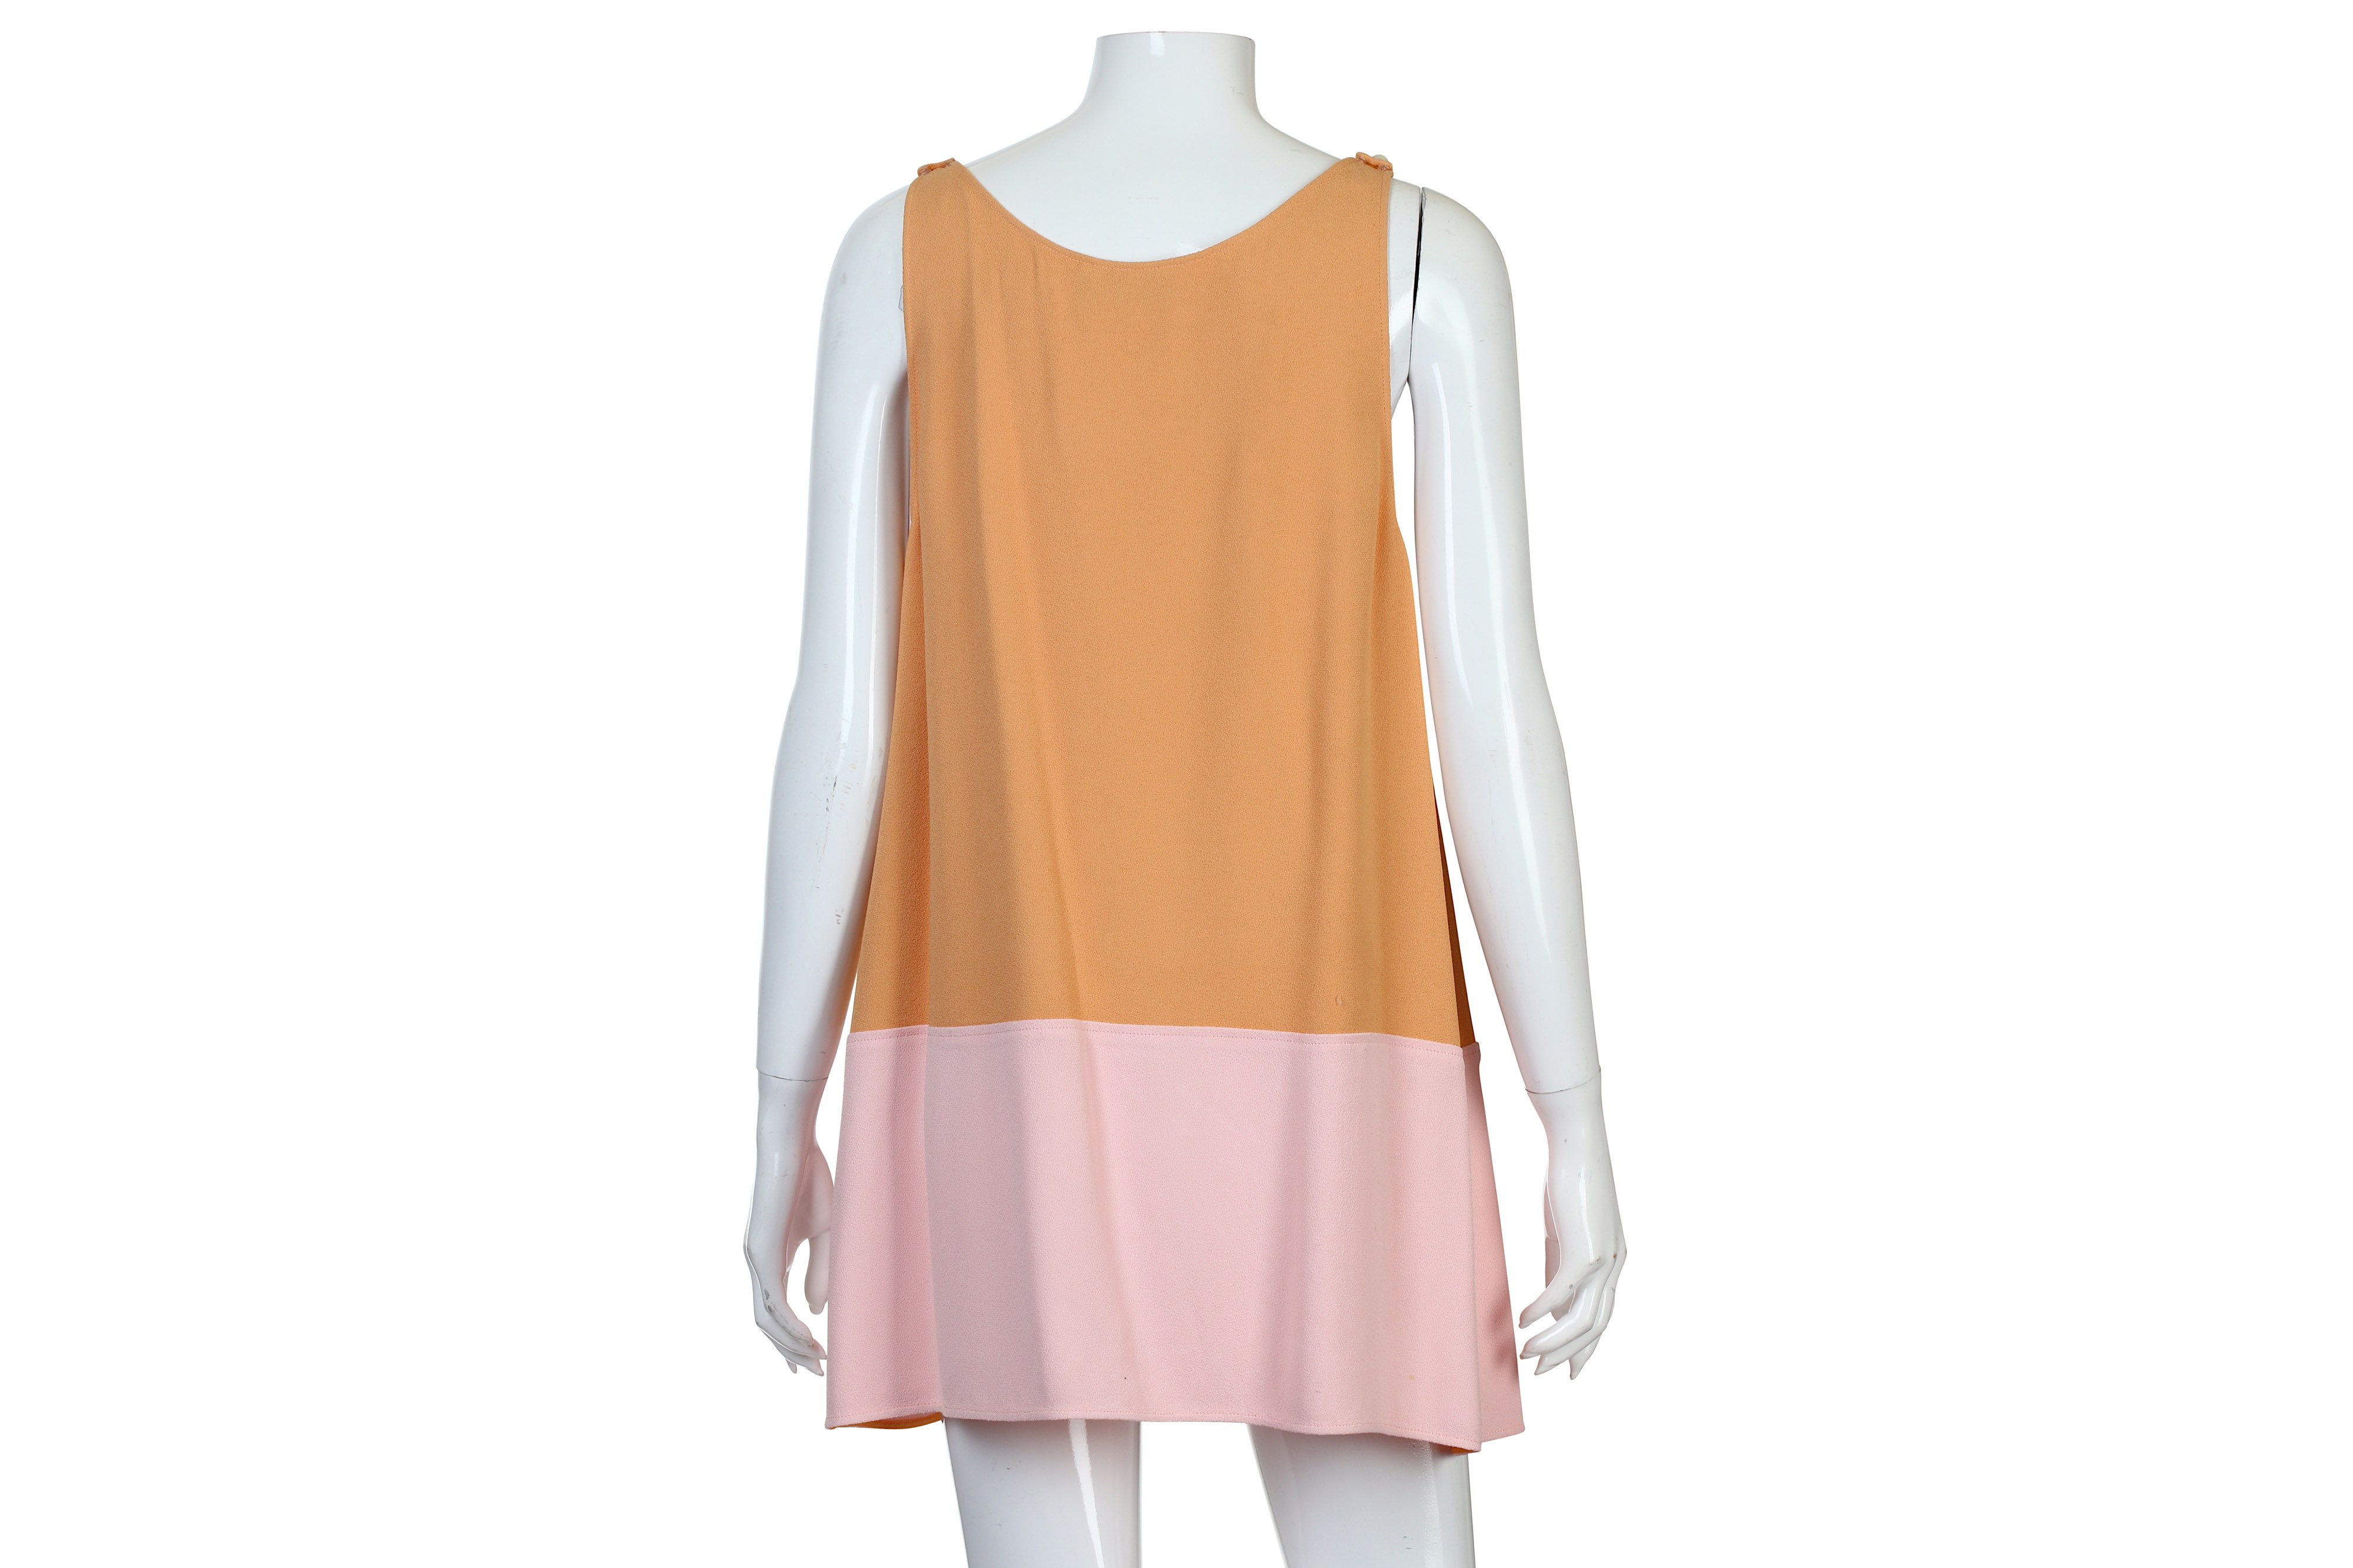 Chanel Orange and Pink Crepe Top/Dress - Image 4 of 5